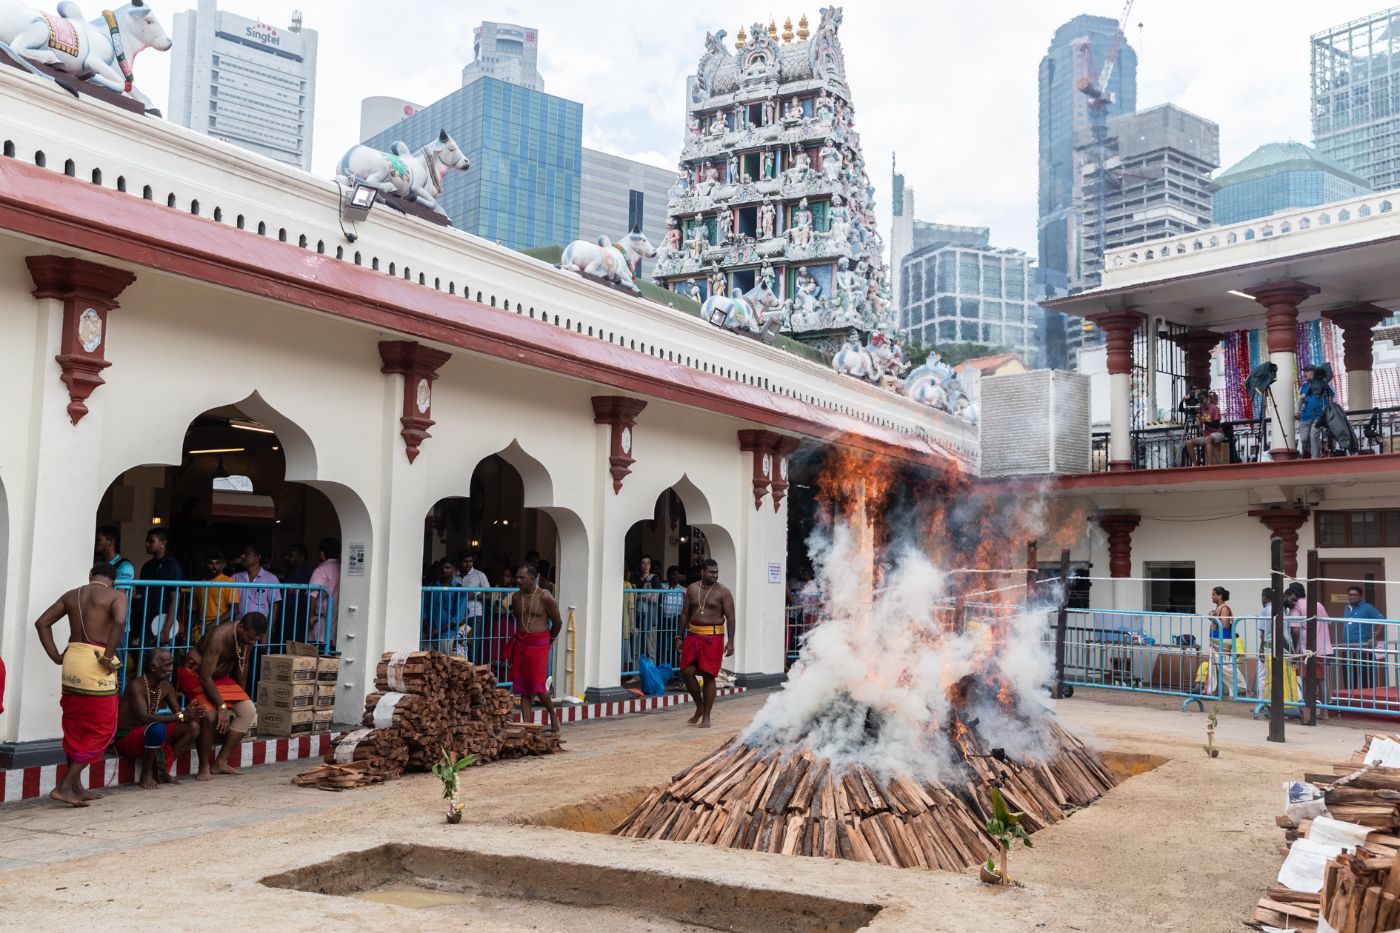 Preparations for the fire pit at Sri Mariamman Temple.